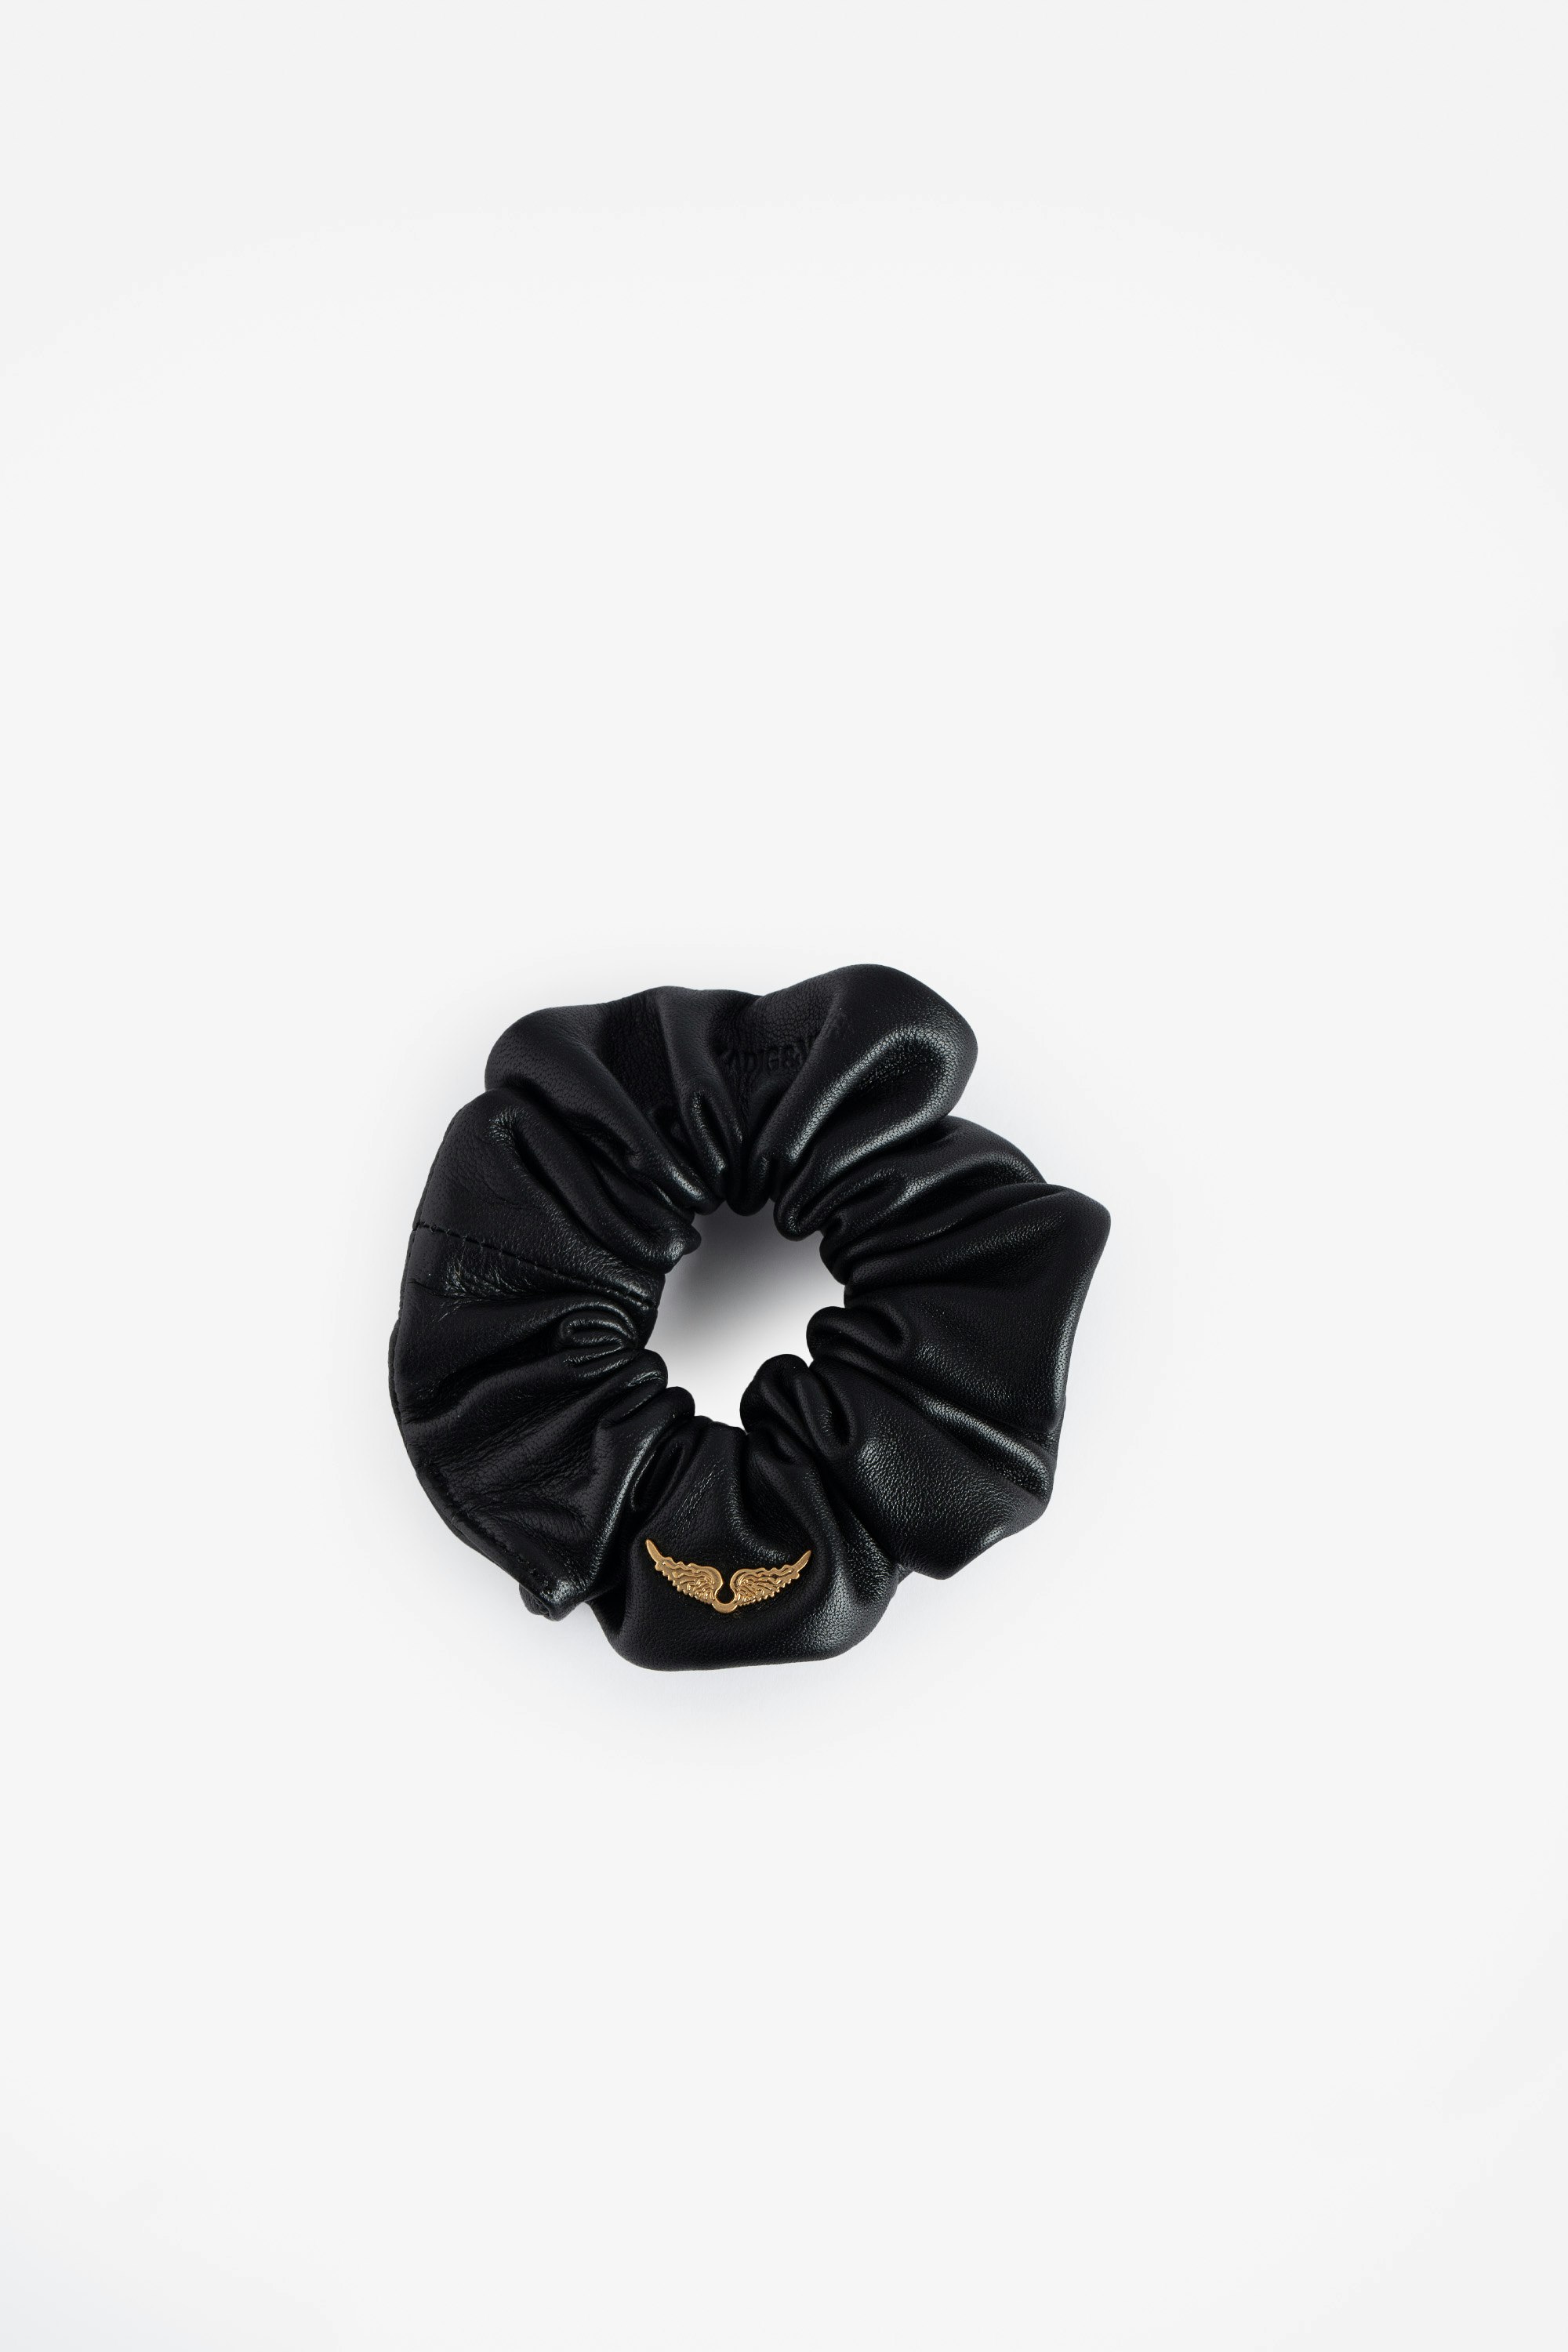 Chouchou Hair Bobble - Voltaire Vice black leather hair bobble with wings motif.